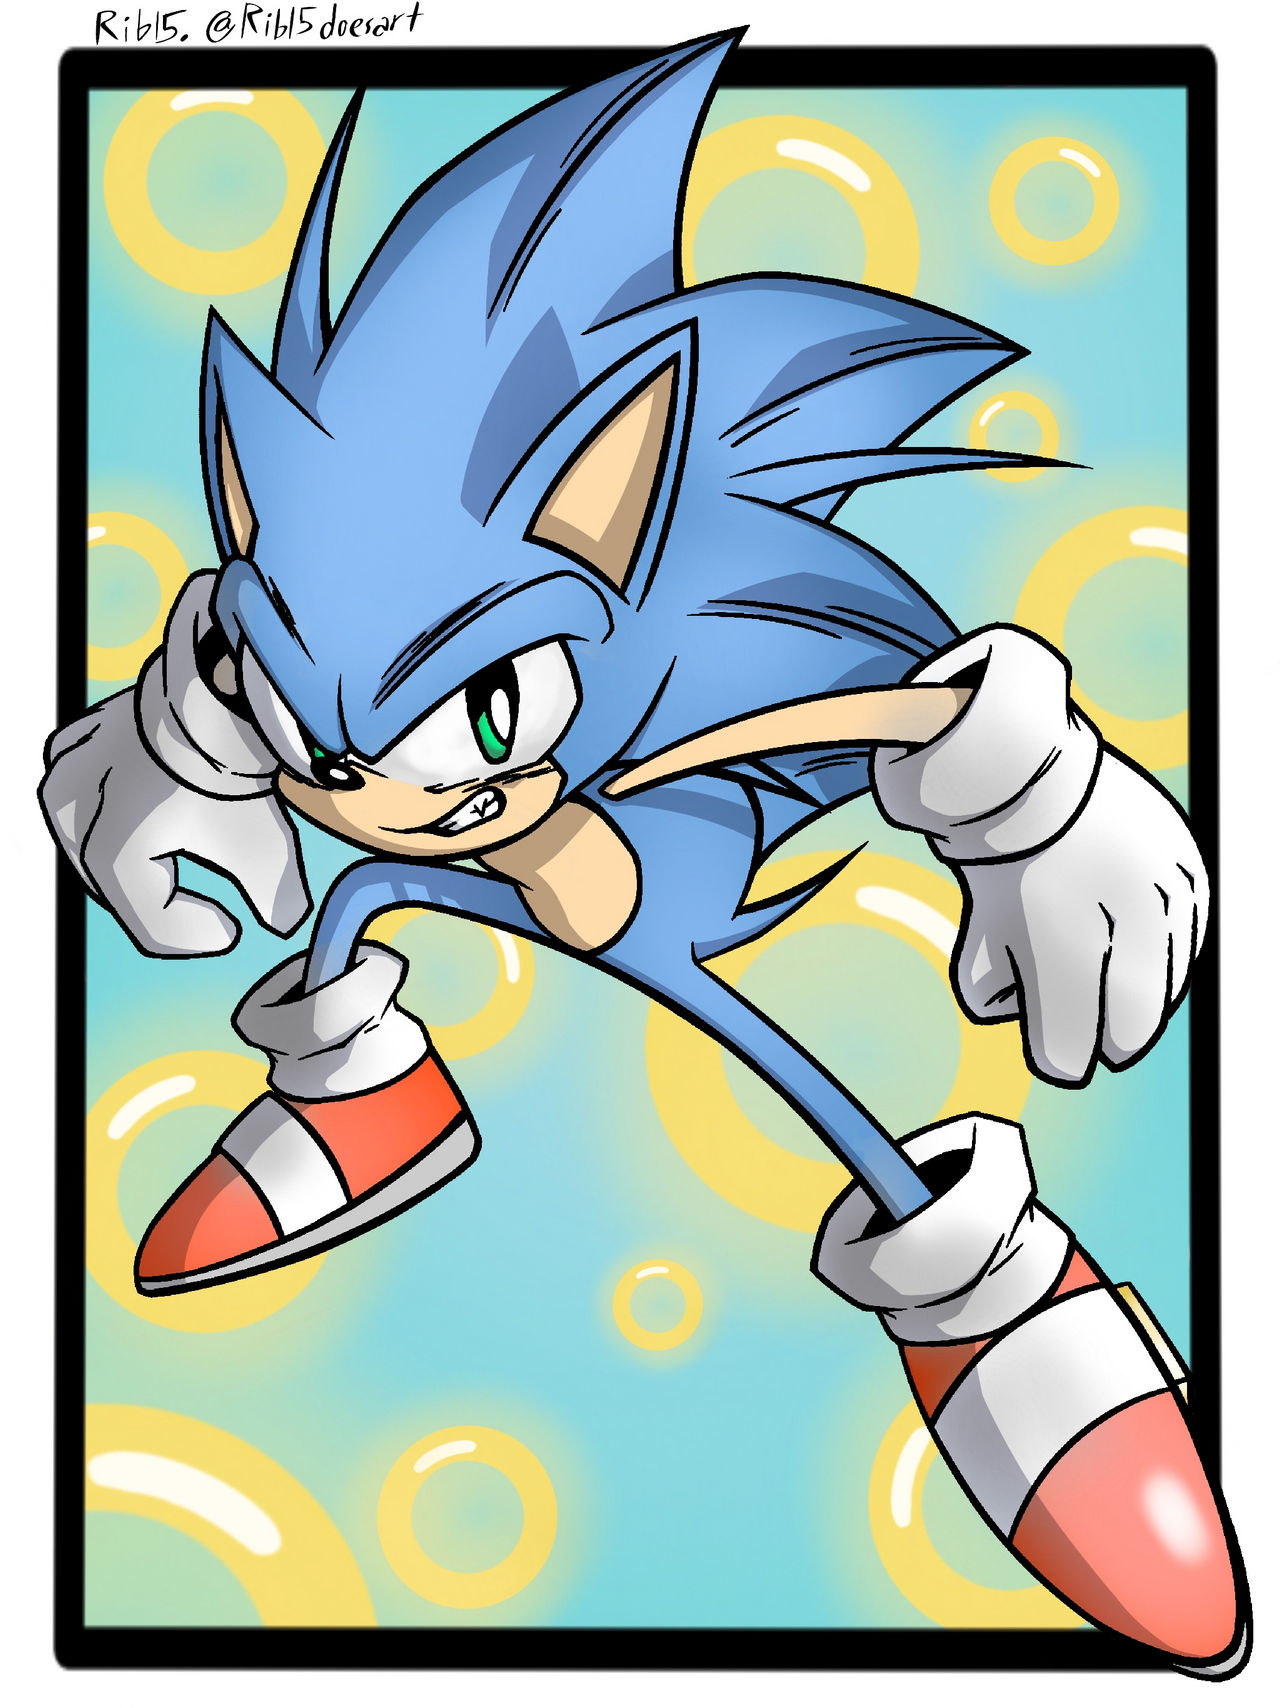 Sonic Movie - Traditional by UltraPixelSonic on DeviantArt